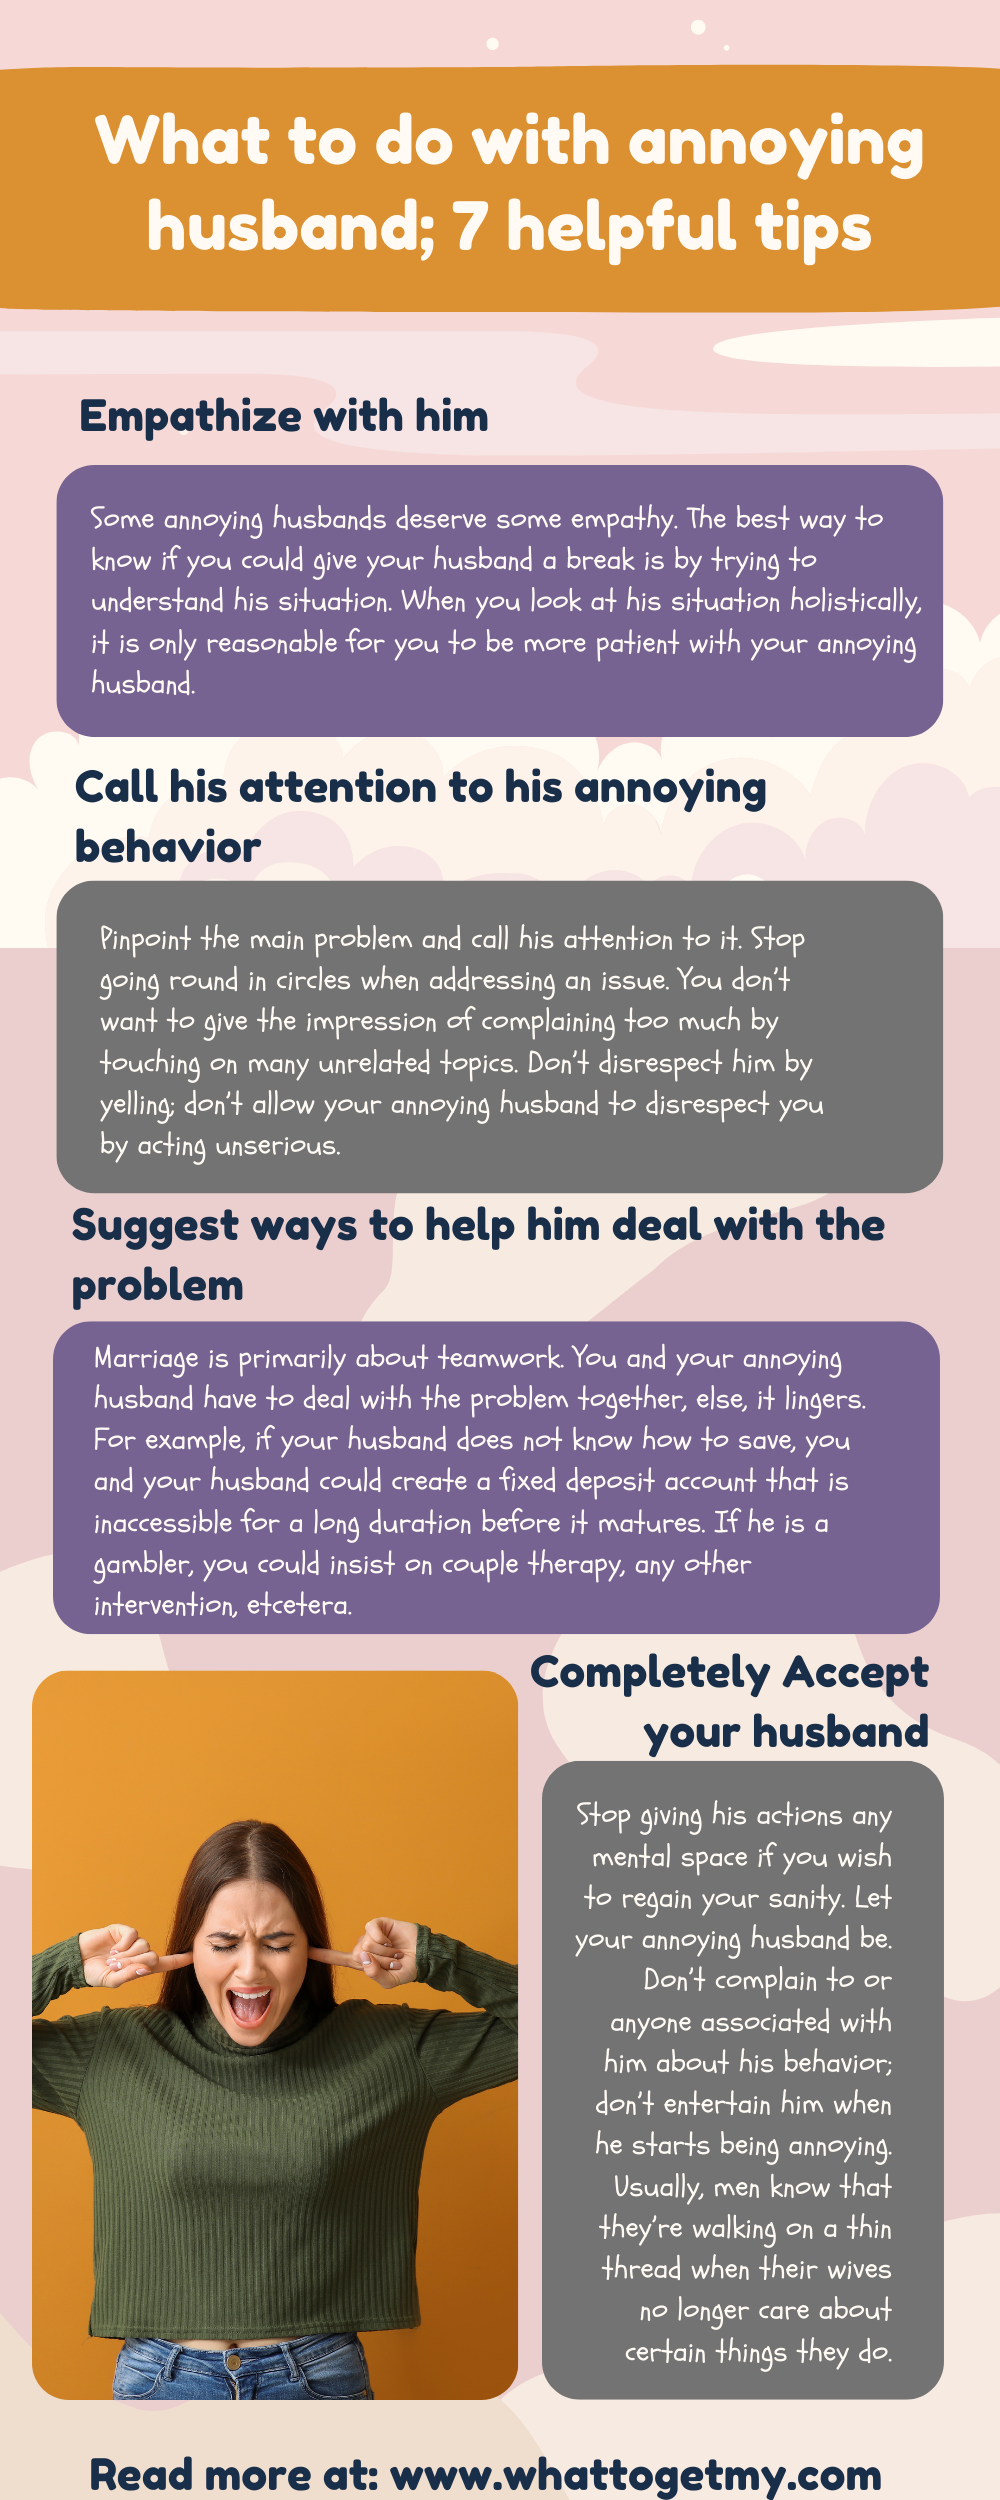 What to do with annoying husband; 7 helpful tips